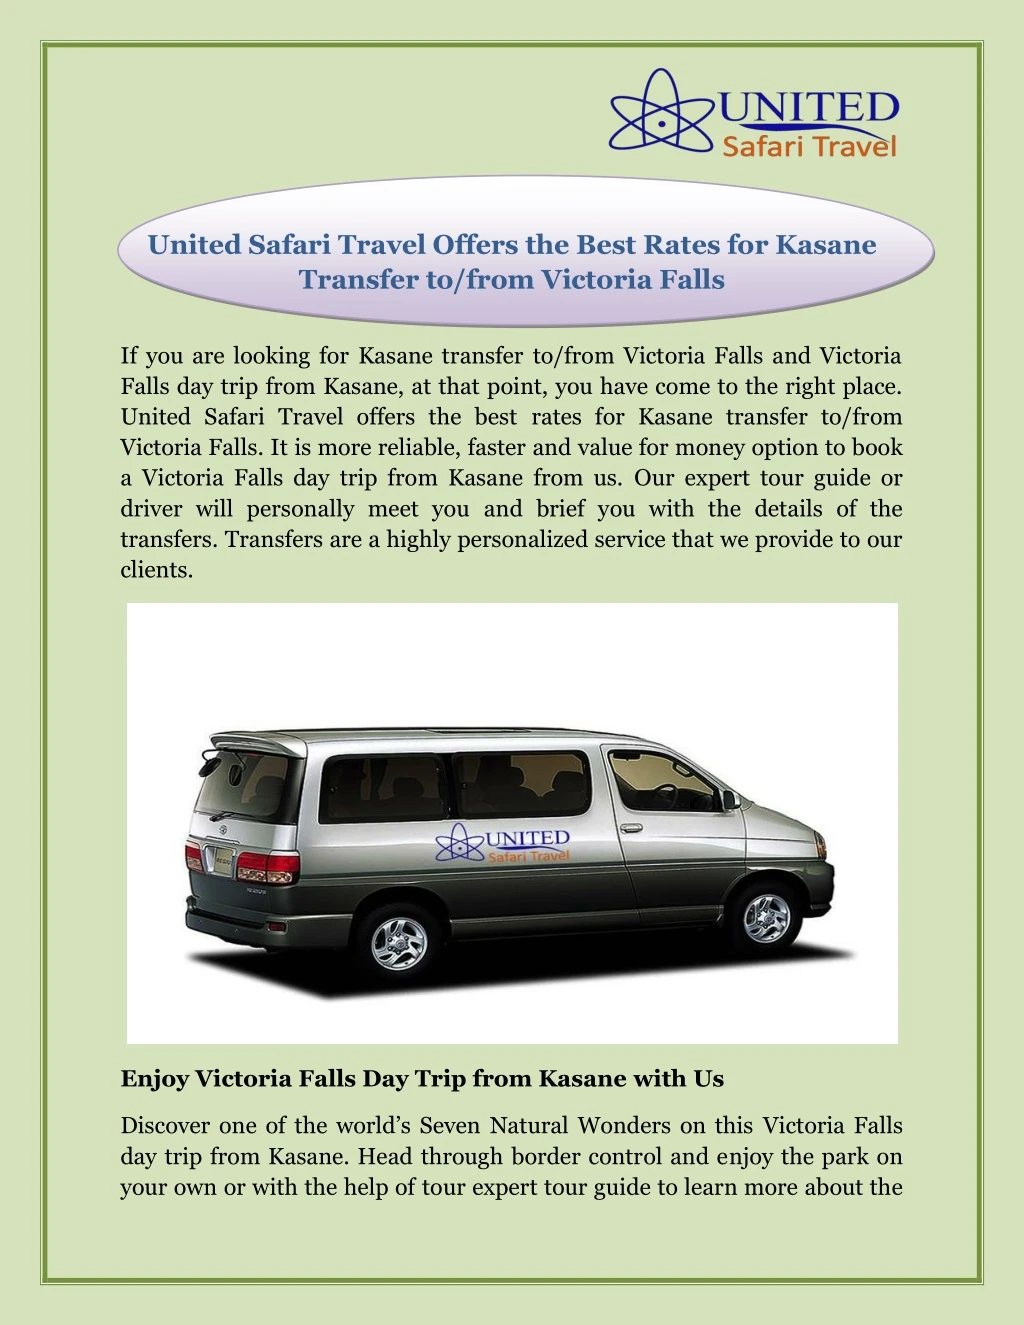 united safari travel offers the best rates